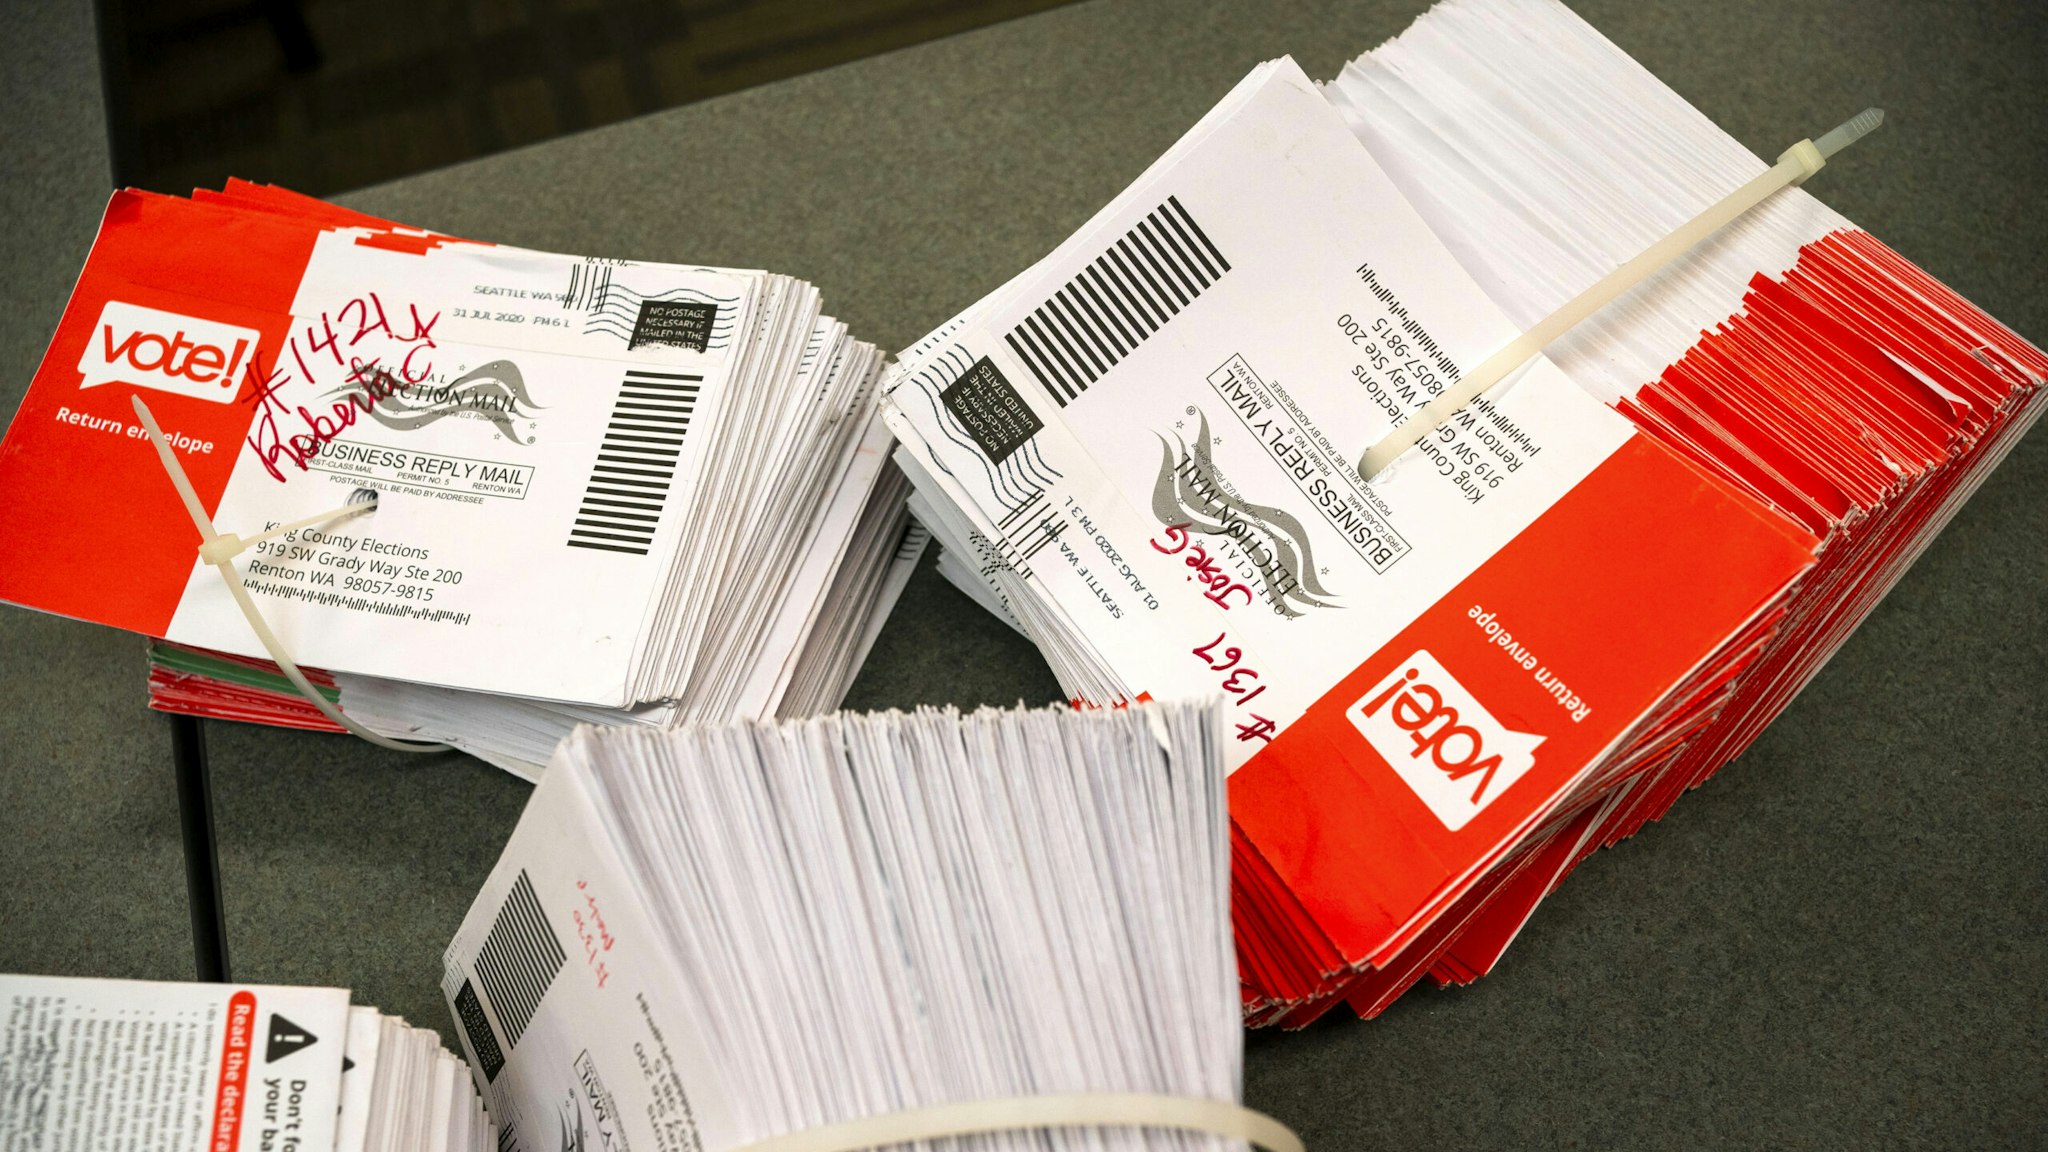 RENTON, WA - AUGUST 04: Opened ballot envelopes await storage at the King County Elections headquarters on August 4, 2020 in Renton, Washington. Today is election day for the primary in Washington state, where voting is done almost exclusively by mail.